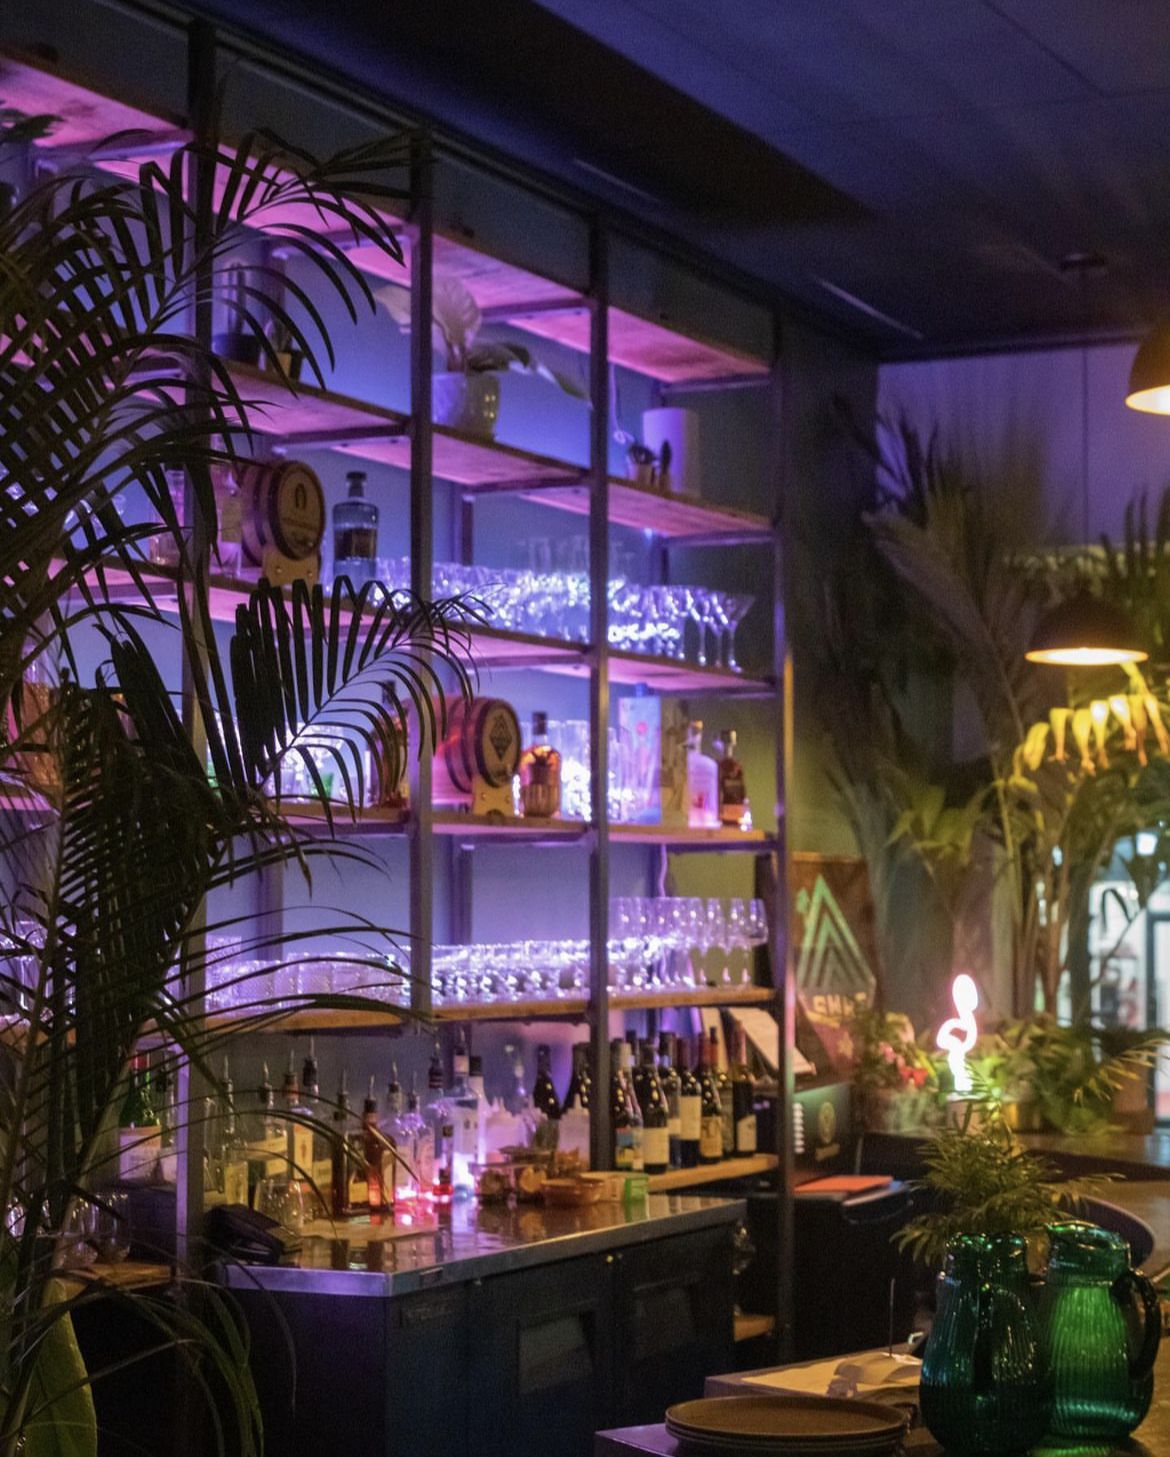 Surf Kitchen bar area with pink and purple lighting and palm tree decor